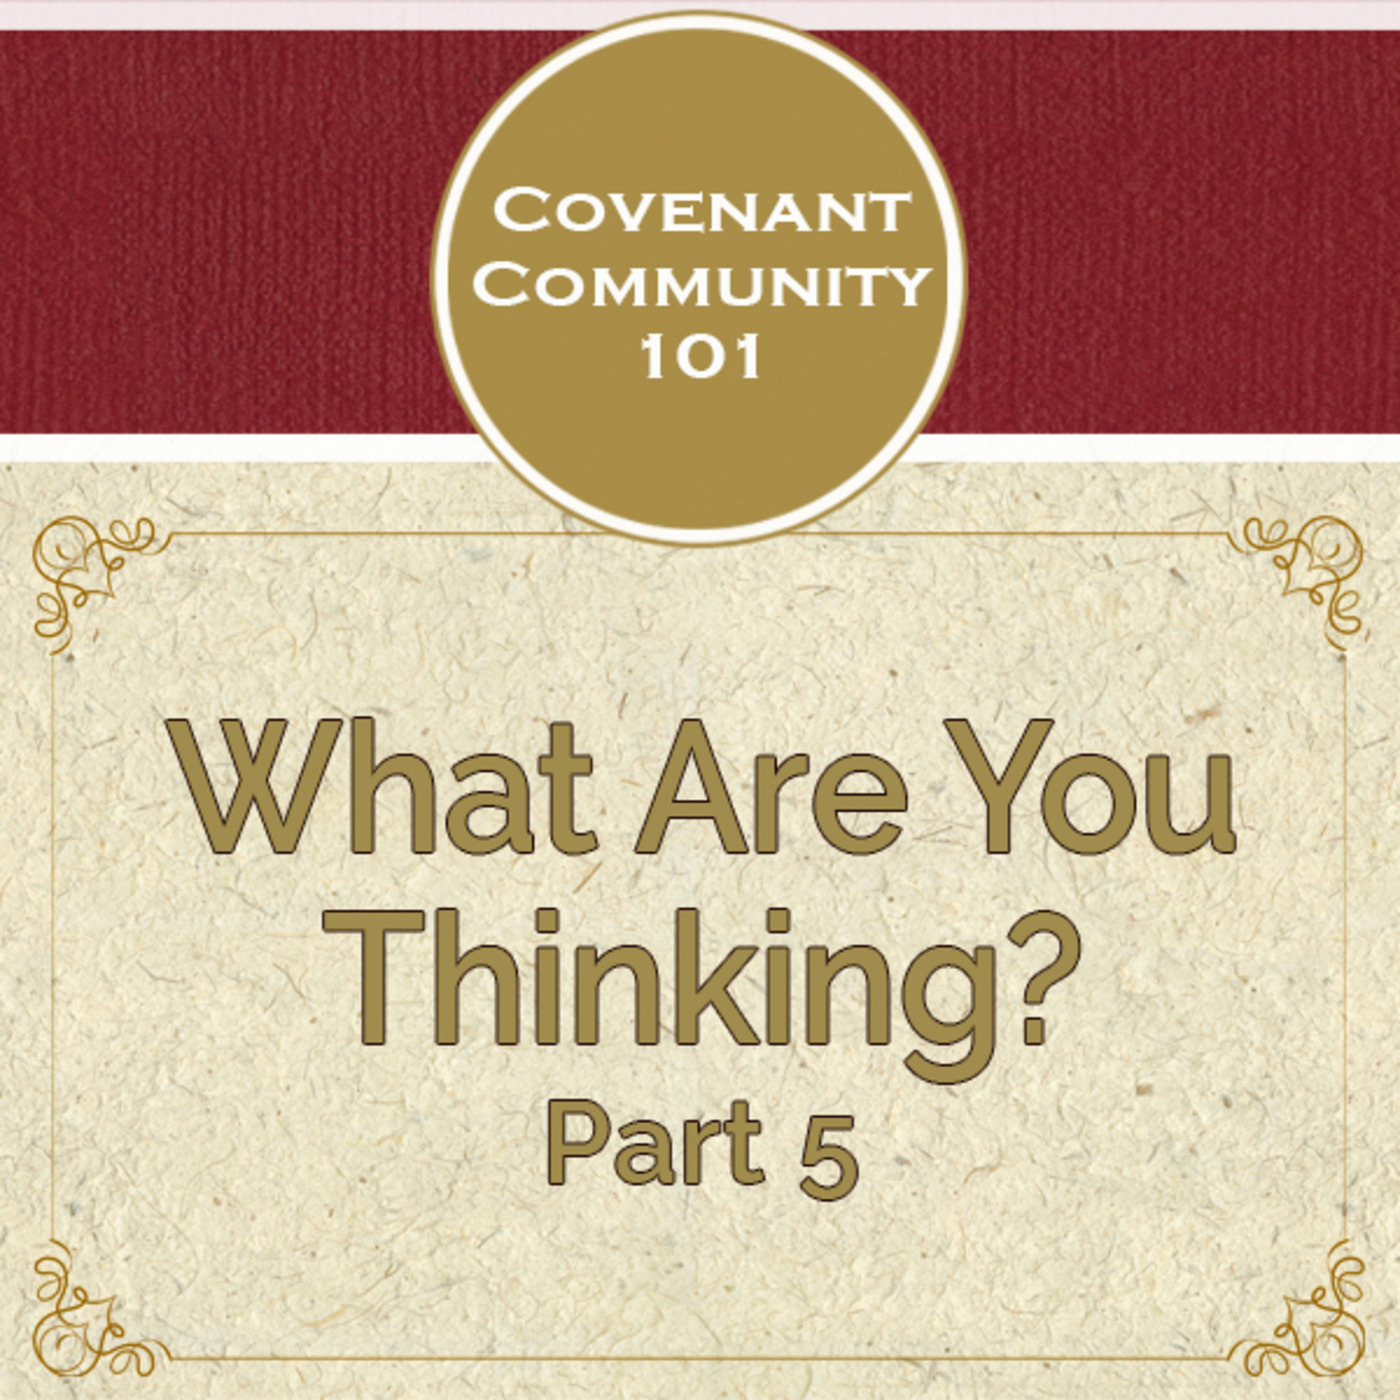 Covenant Community 101: What Are You Thinking? - Part 5